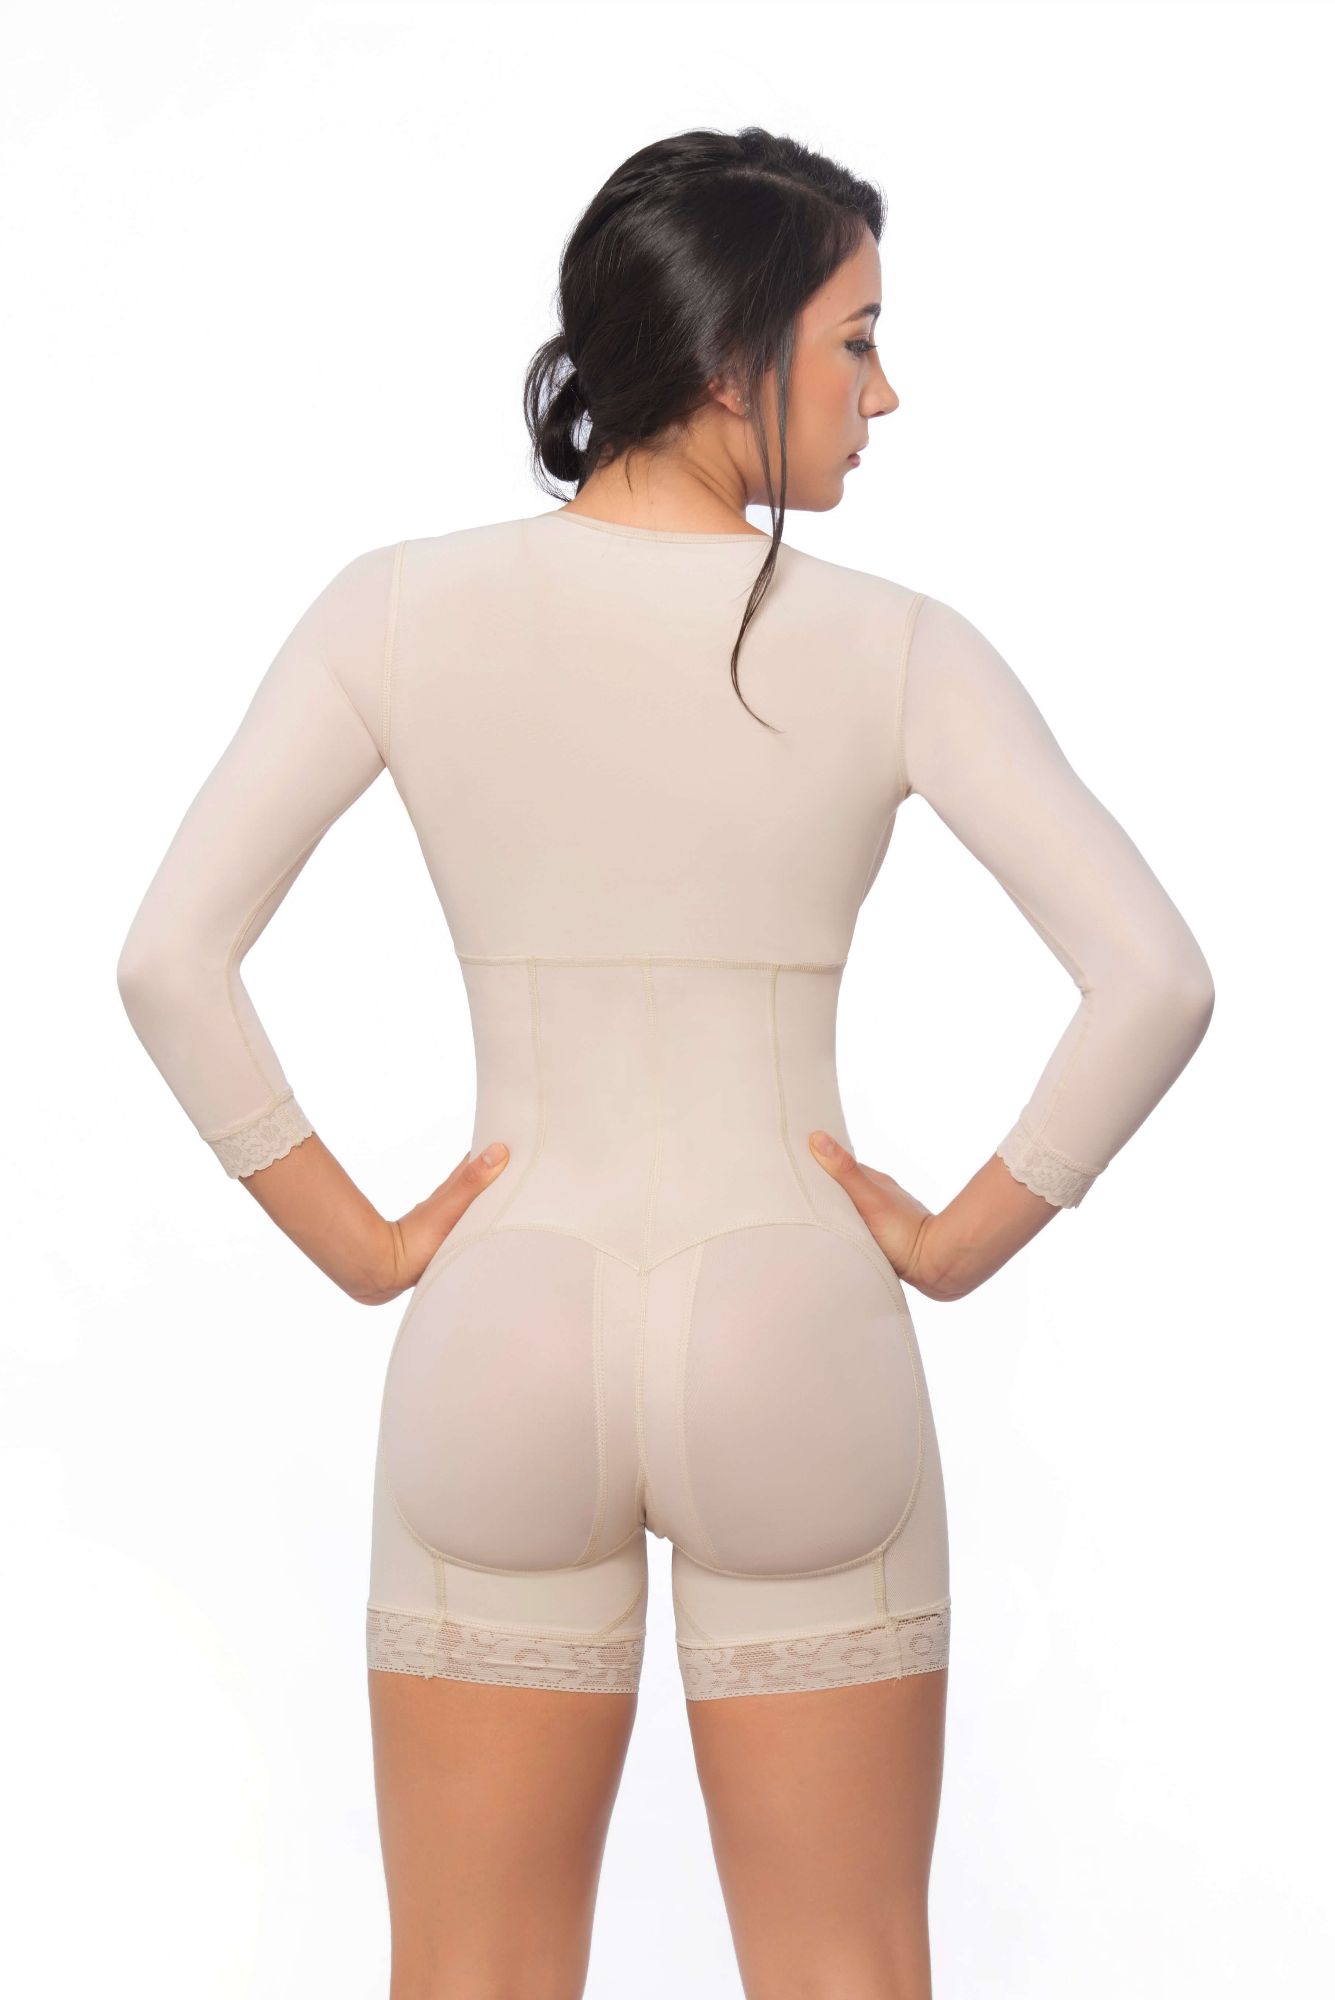 Braless full body under knee faja with sleeves and hook closure - Contour  Fajas Africa